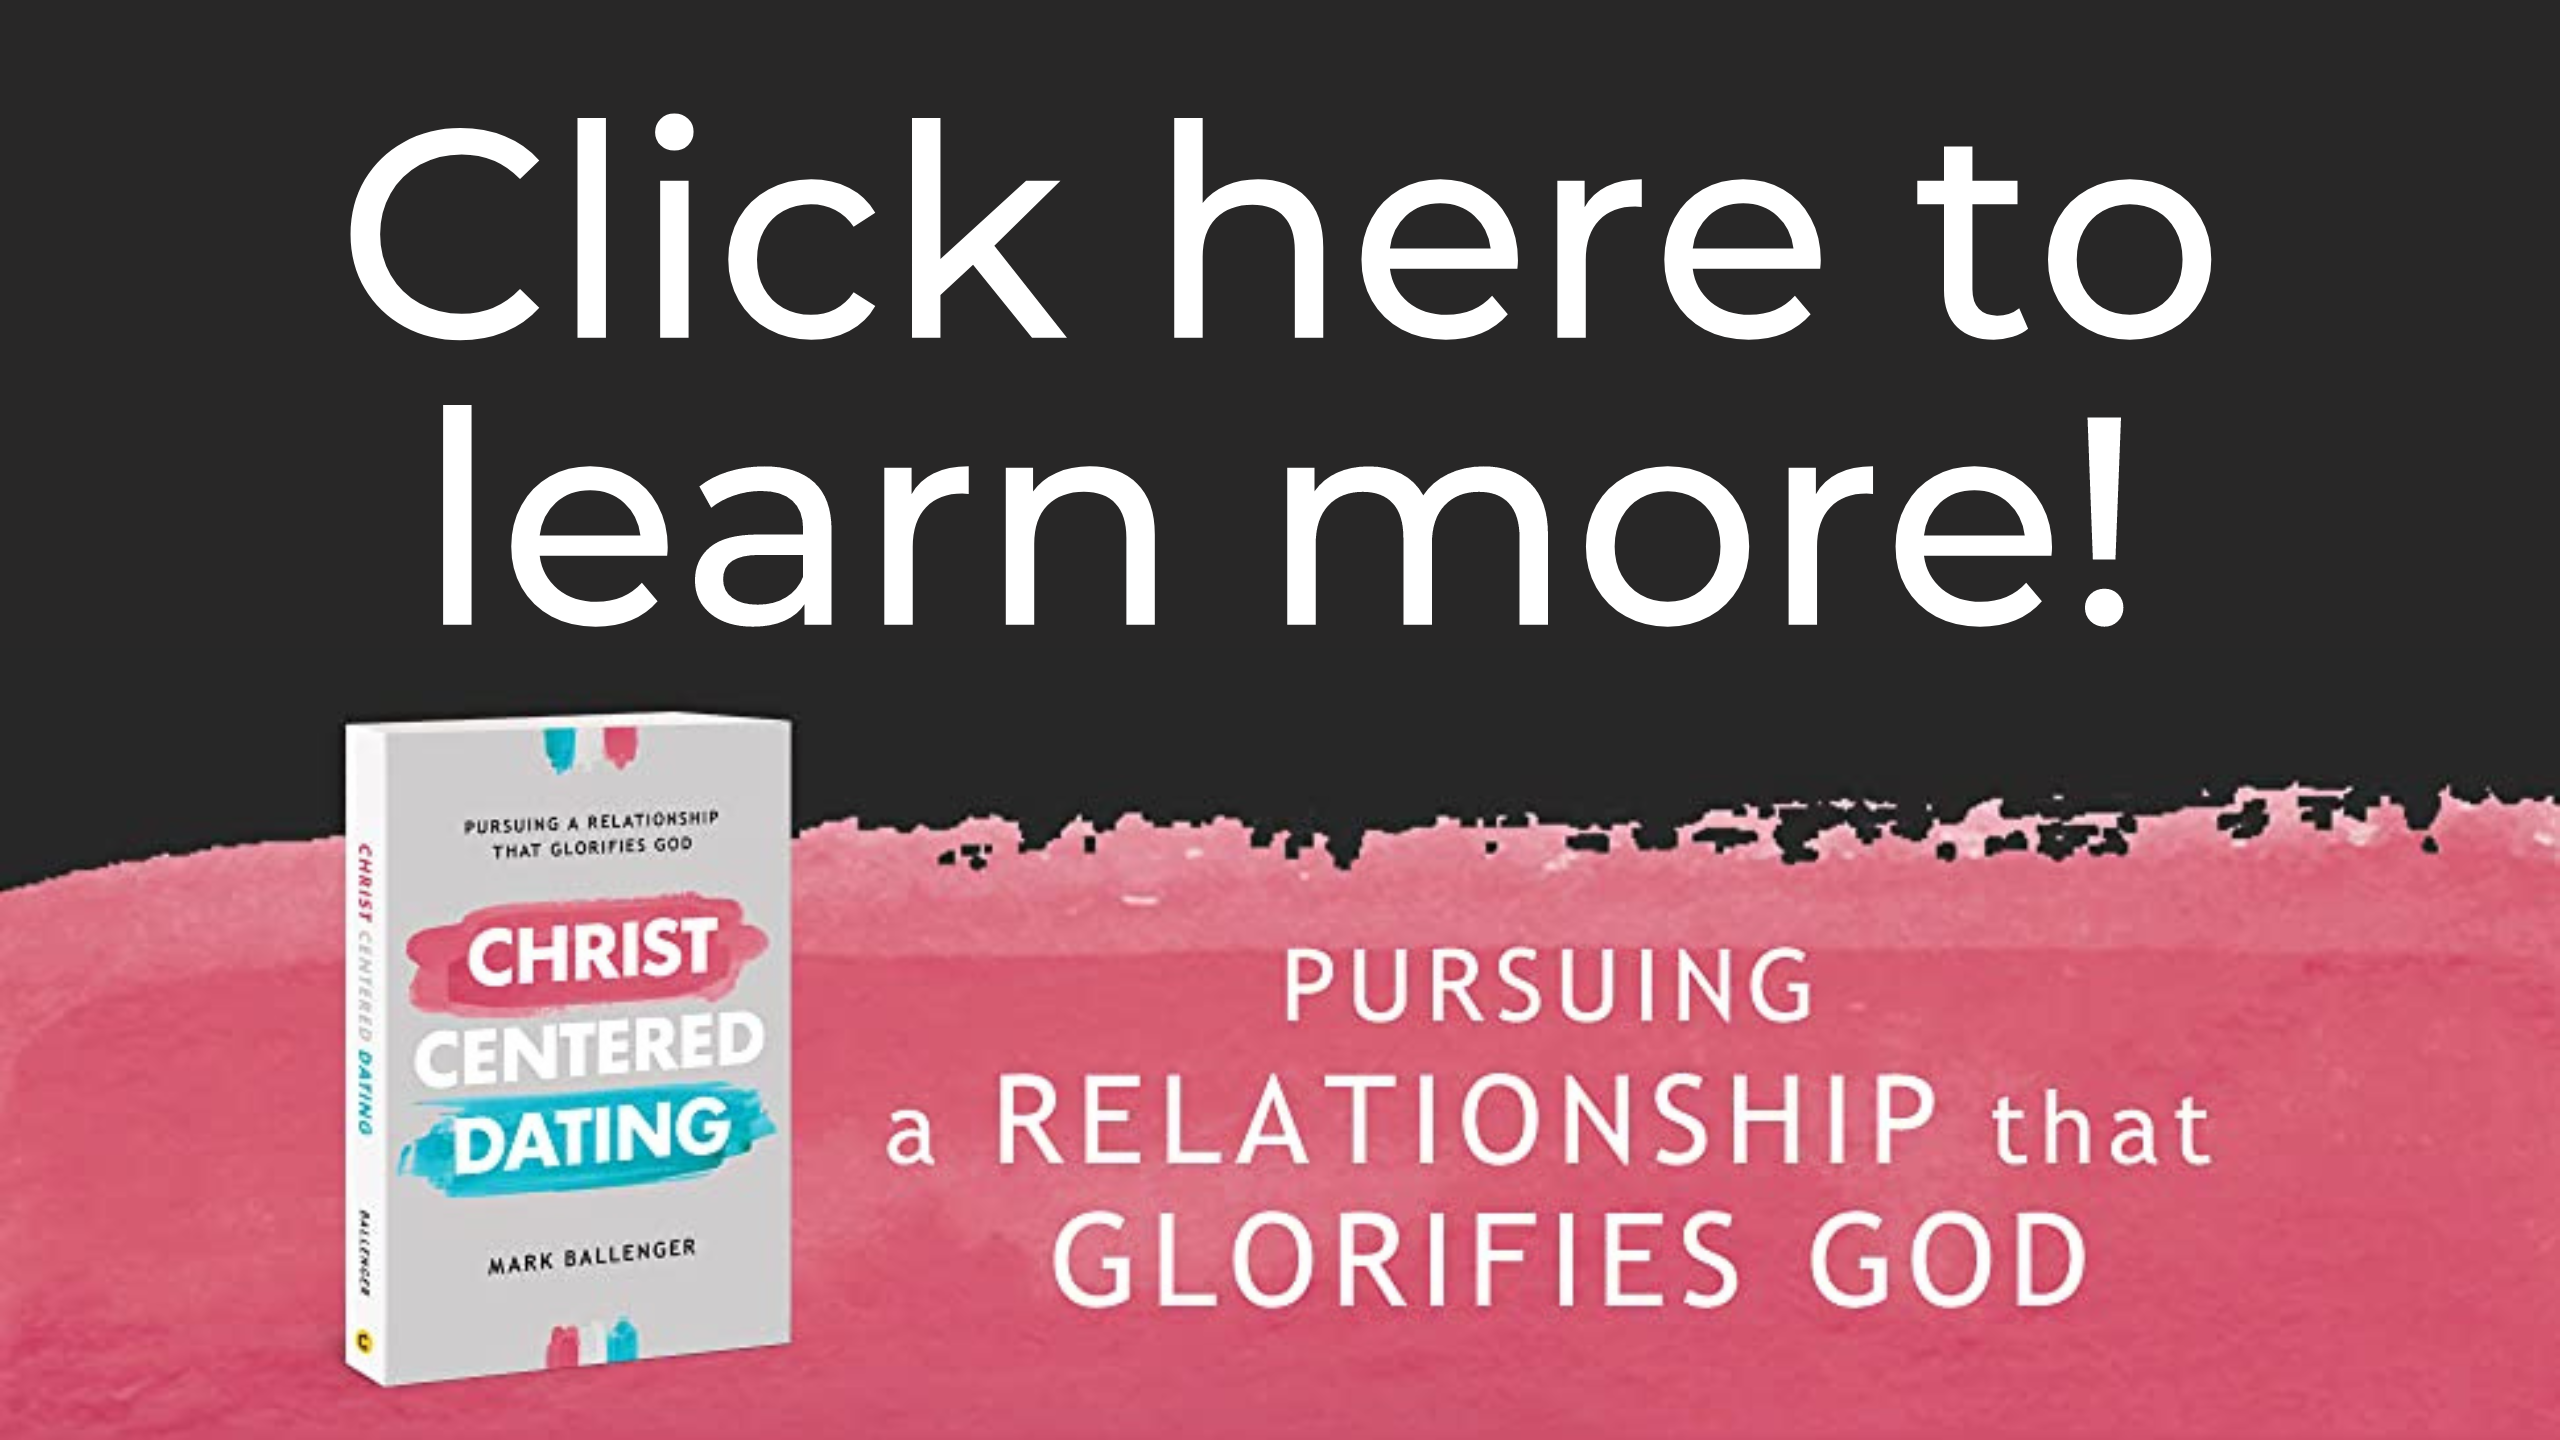 what glorifys god more singleness or dating